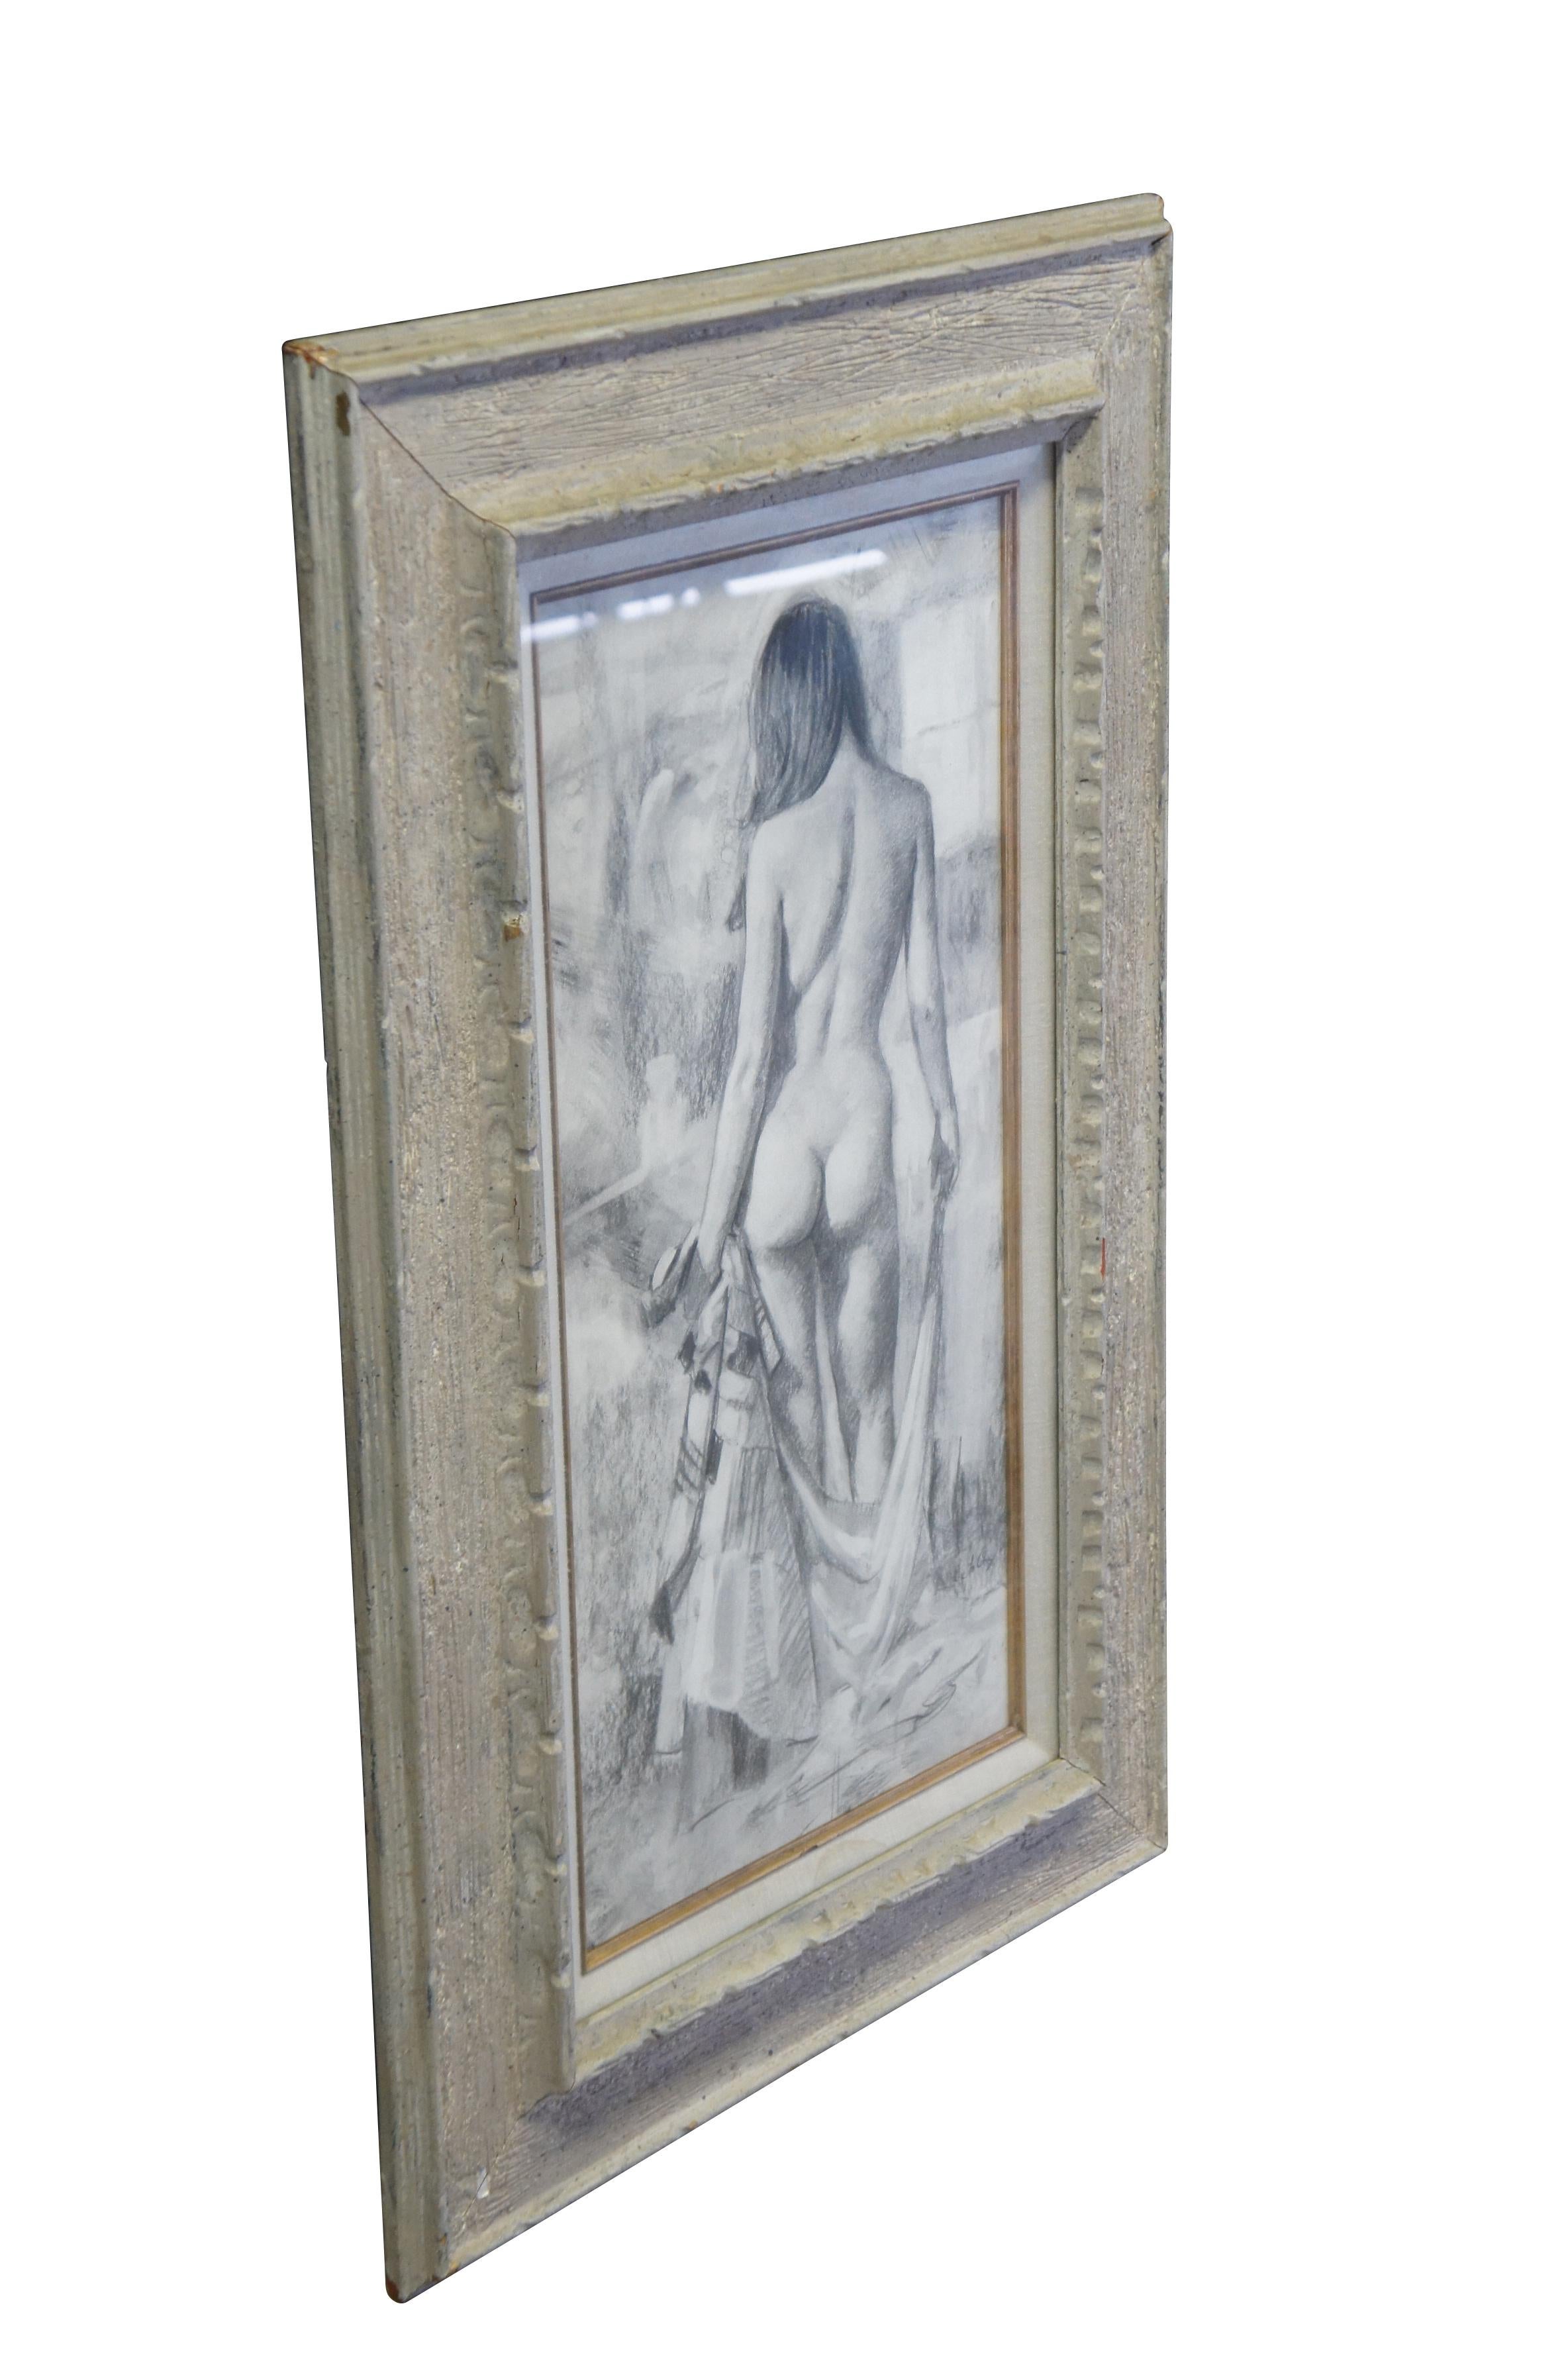 Vintage Jerry Del La Cruz original charcoal drawing on paper titled Kavin, At Home.  Features a nude female figure undressing.  Circa 1974.

Jerry De La Cruz is a Denver native who has steadfastly maintained his status as a professional fine artist